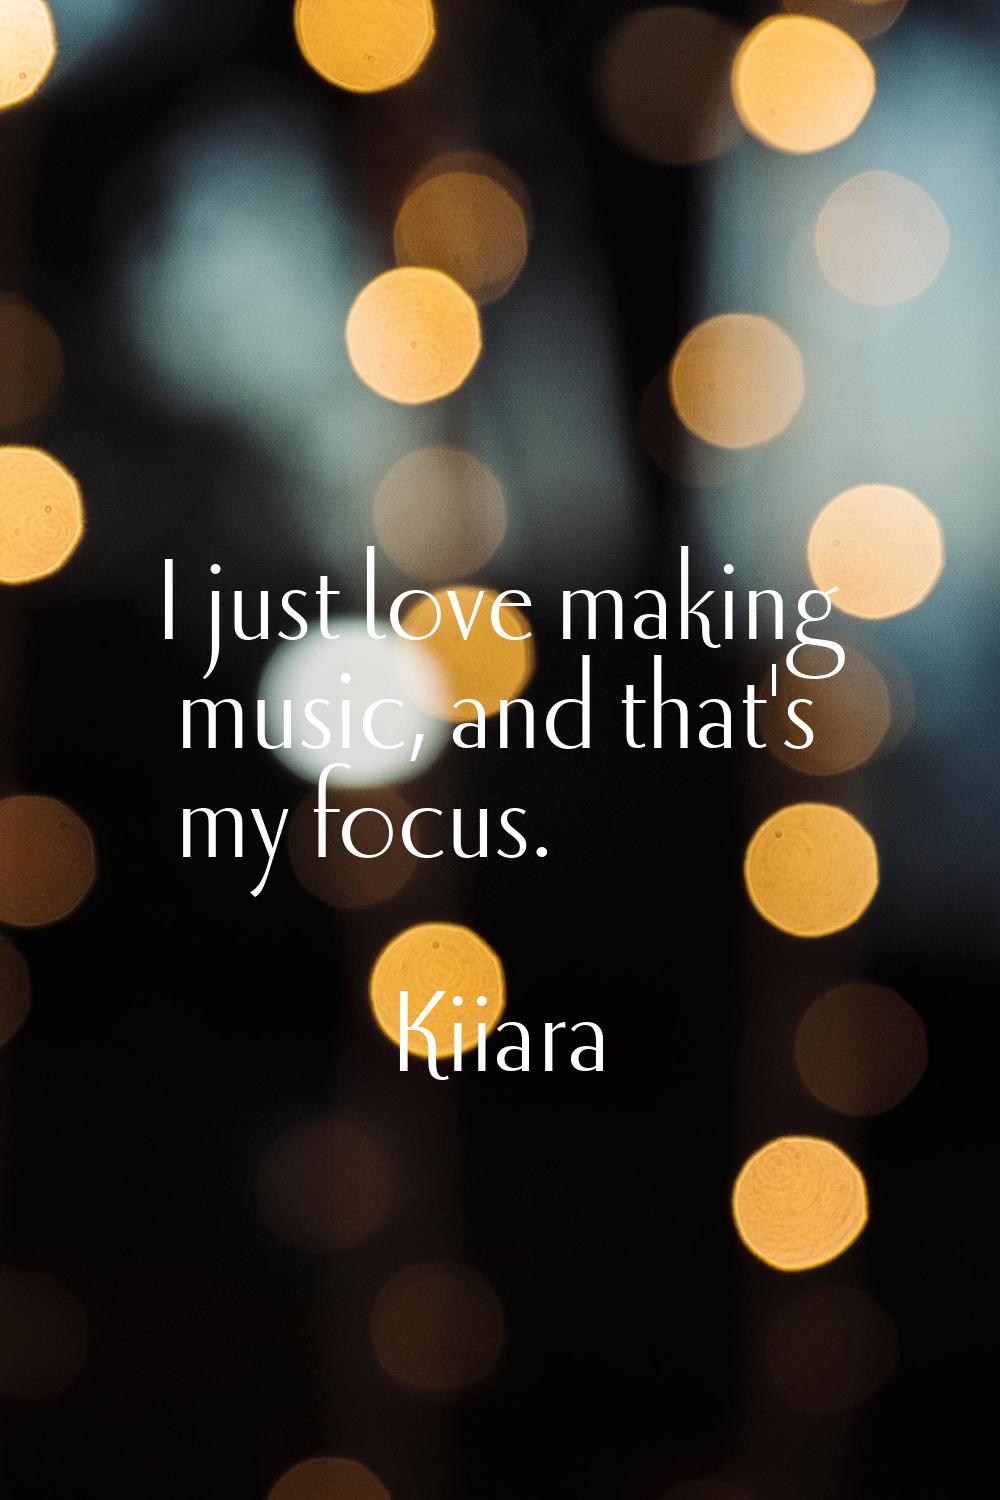 I just love making music, and that's my focus.